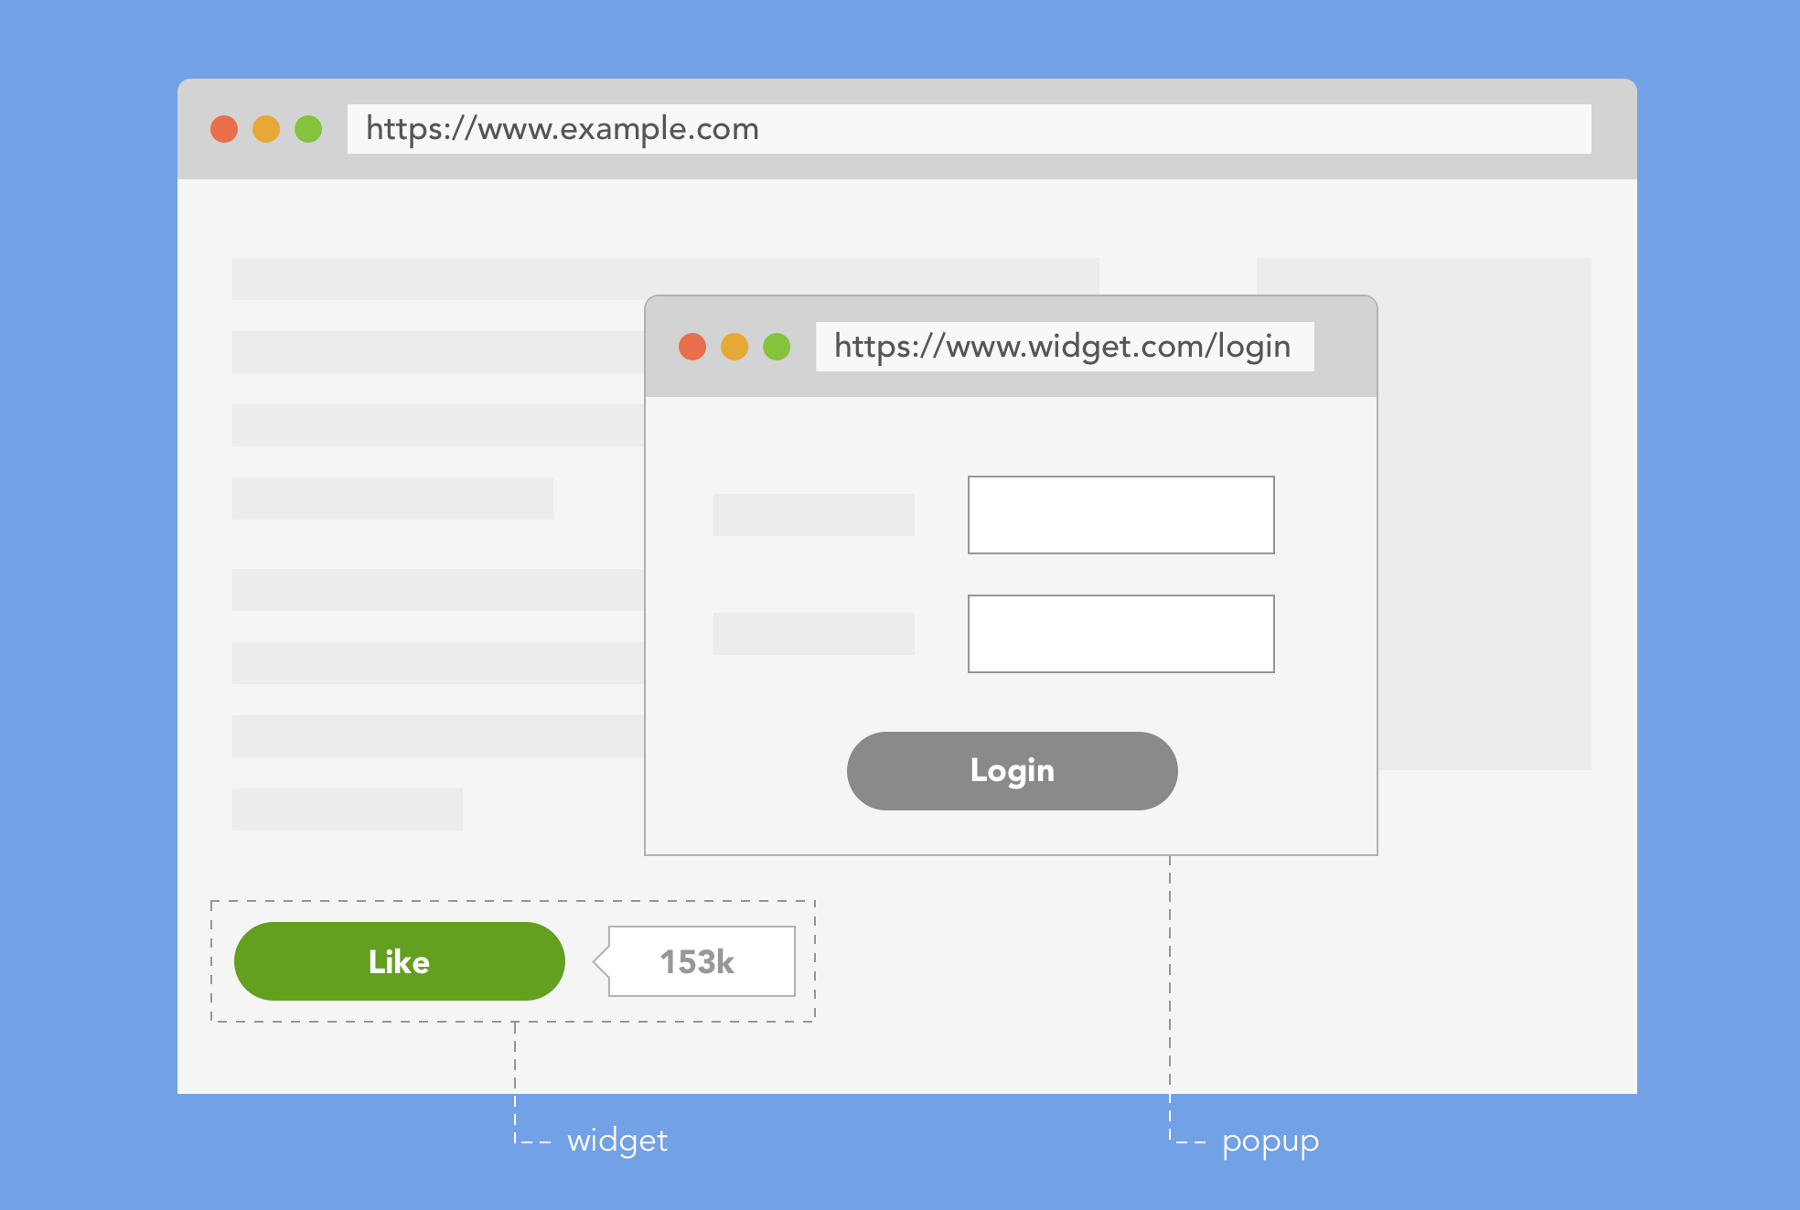 A widget and a popup served from a different domain